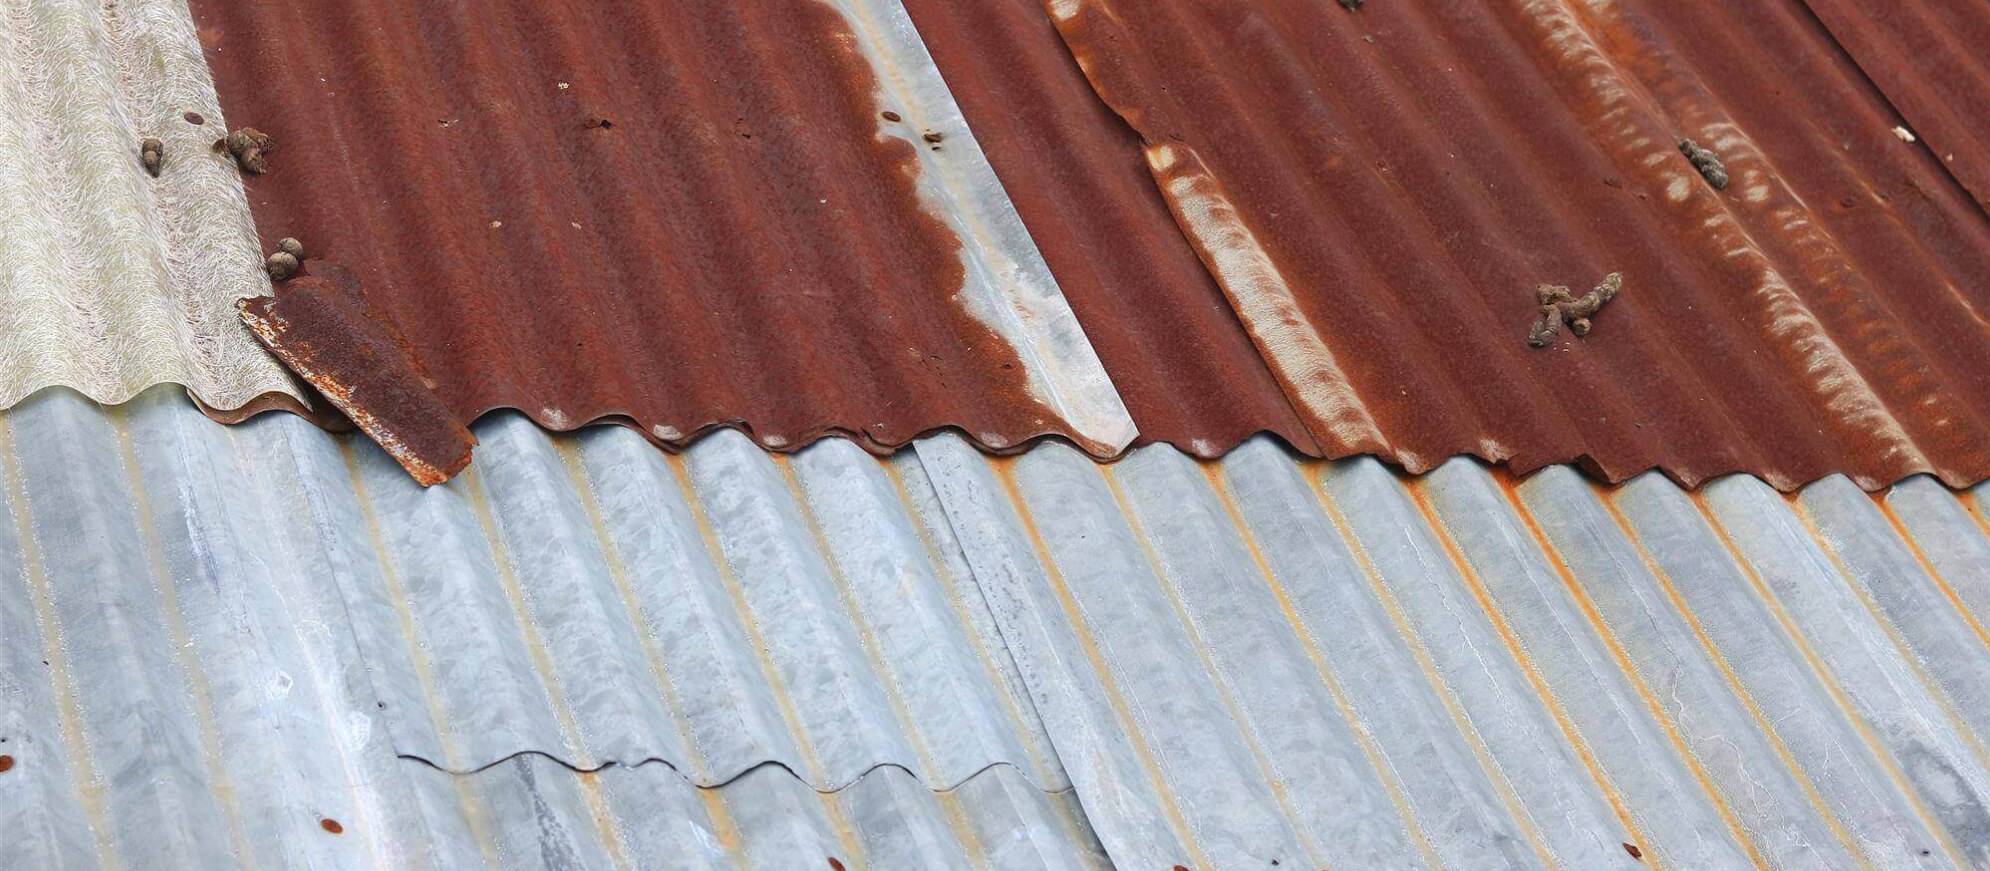 benefits of a metal roof